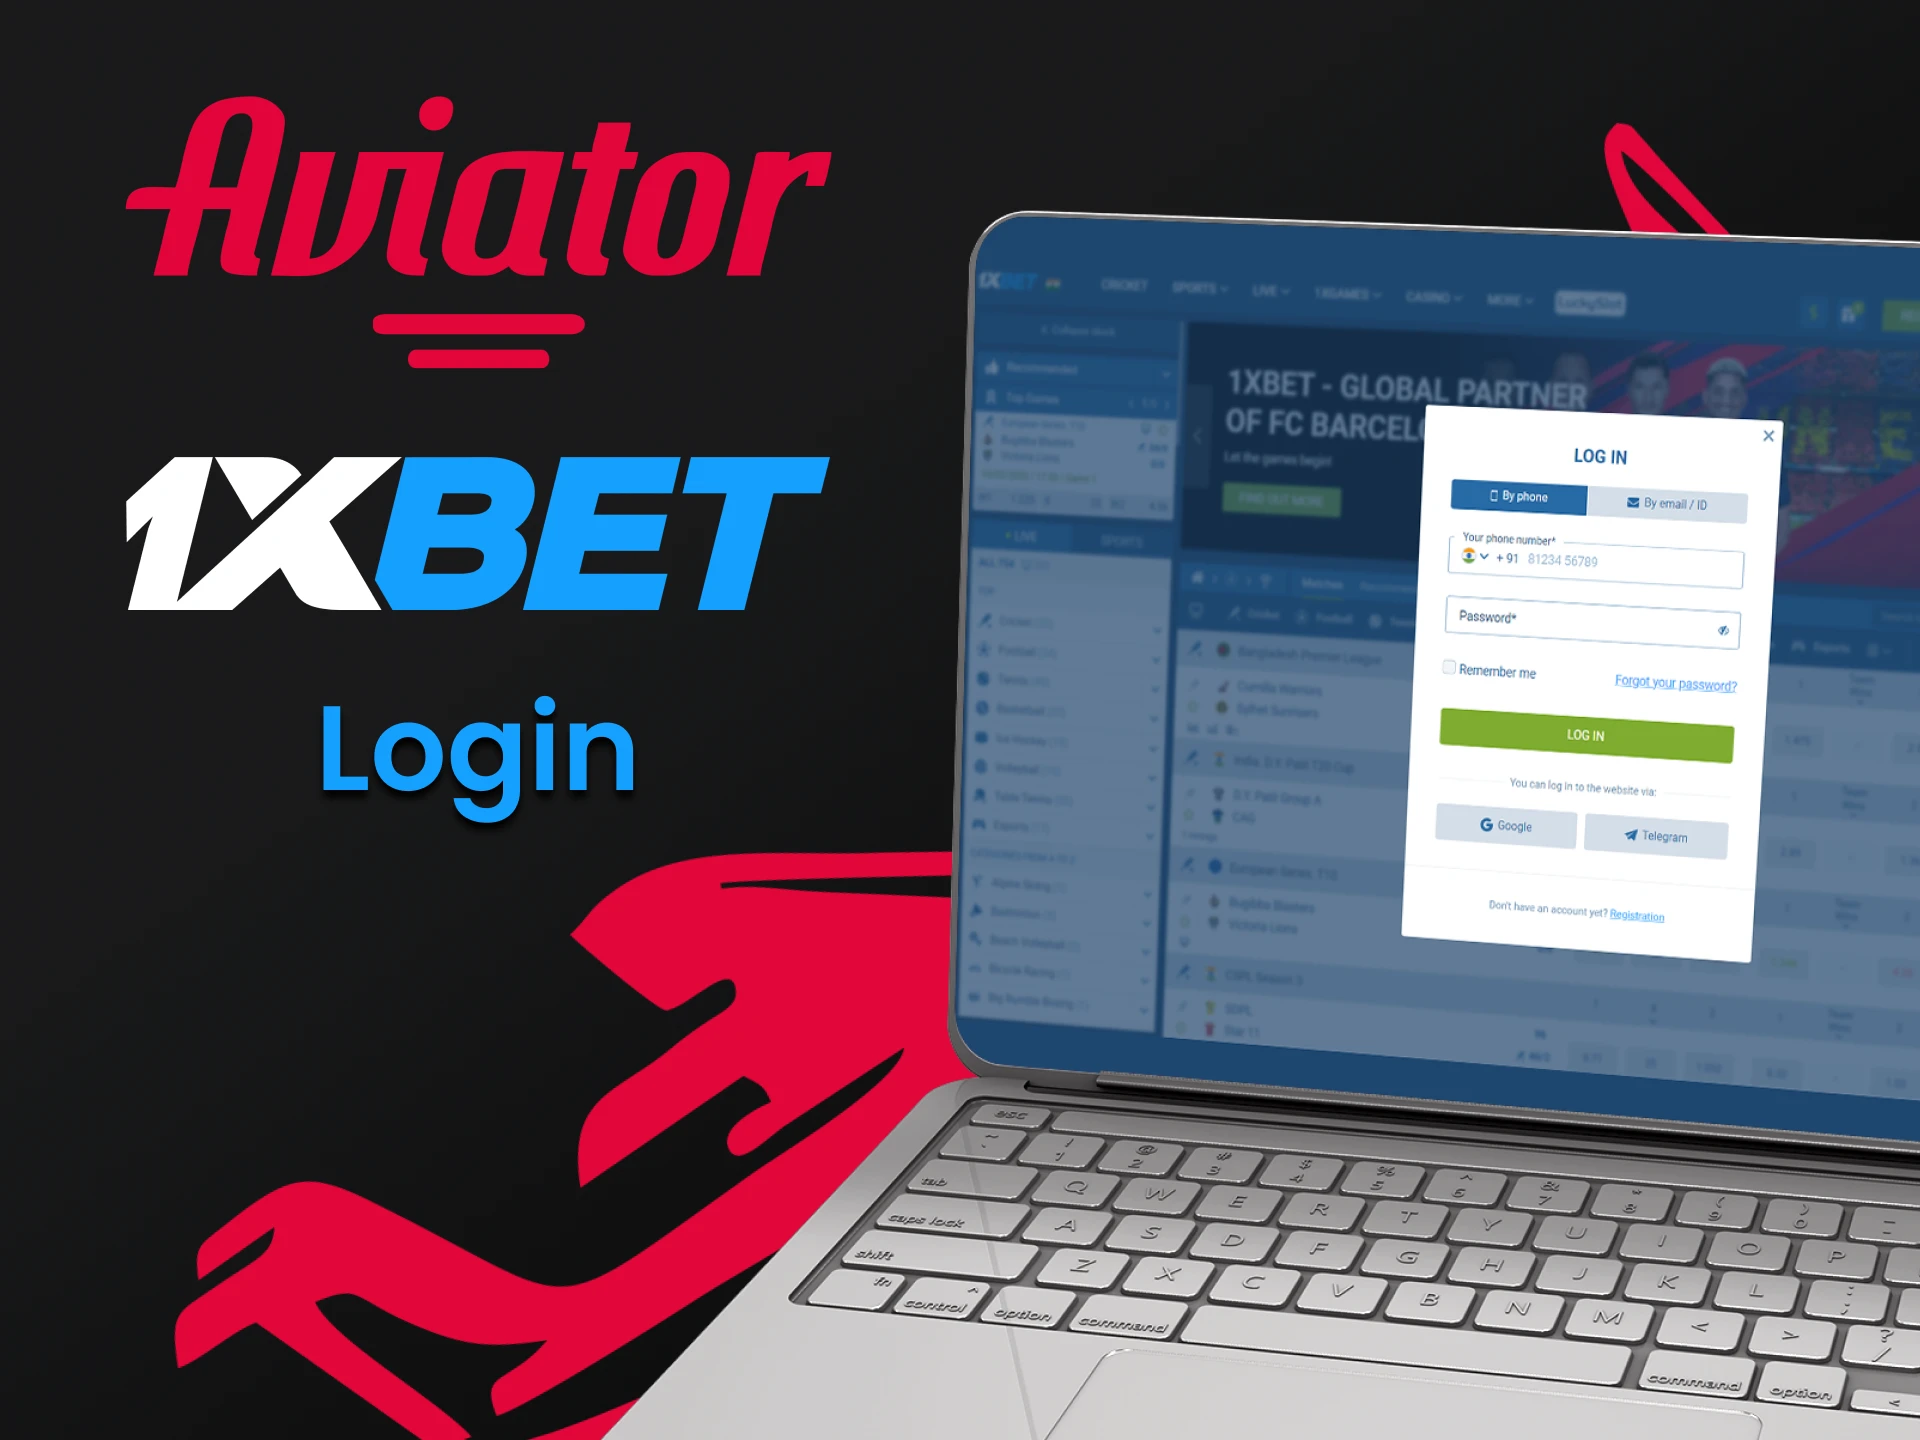 Login to your account to play Aviator at 1xbet.